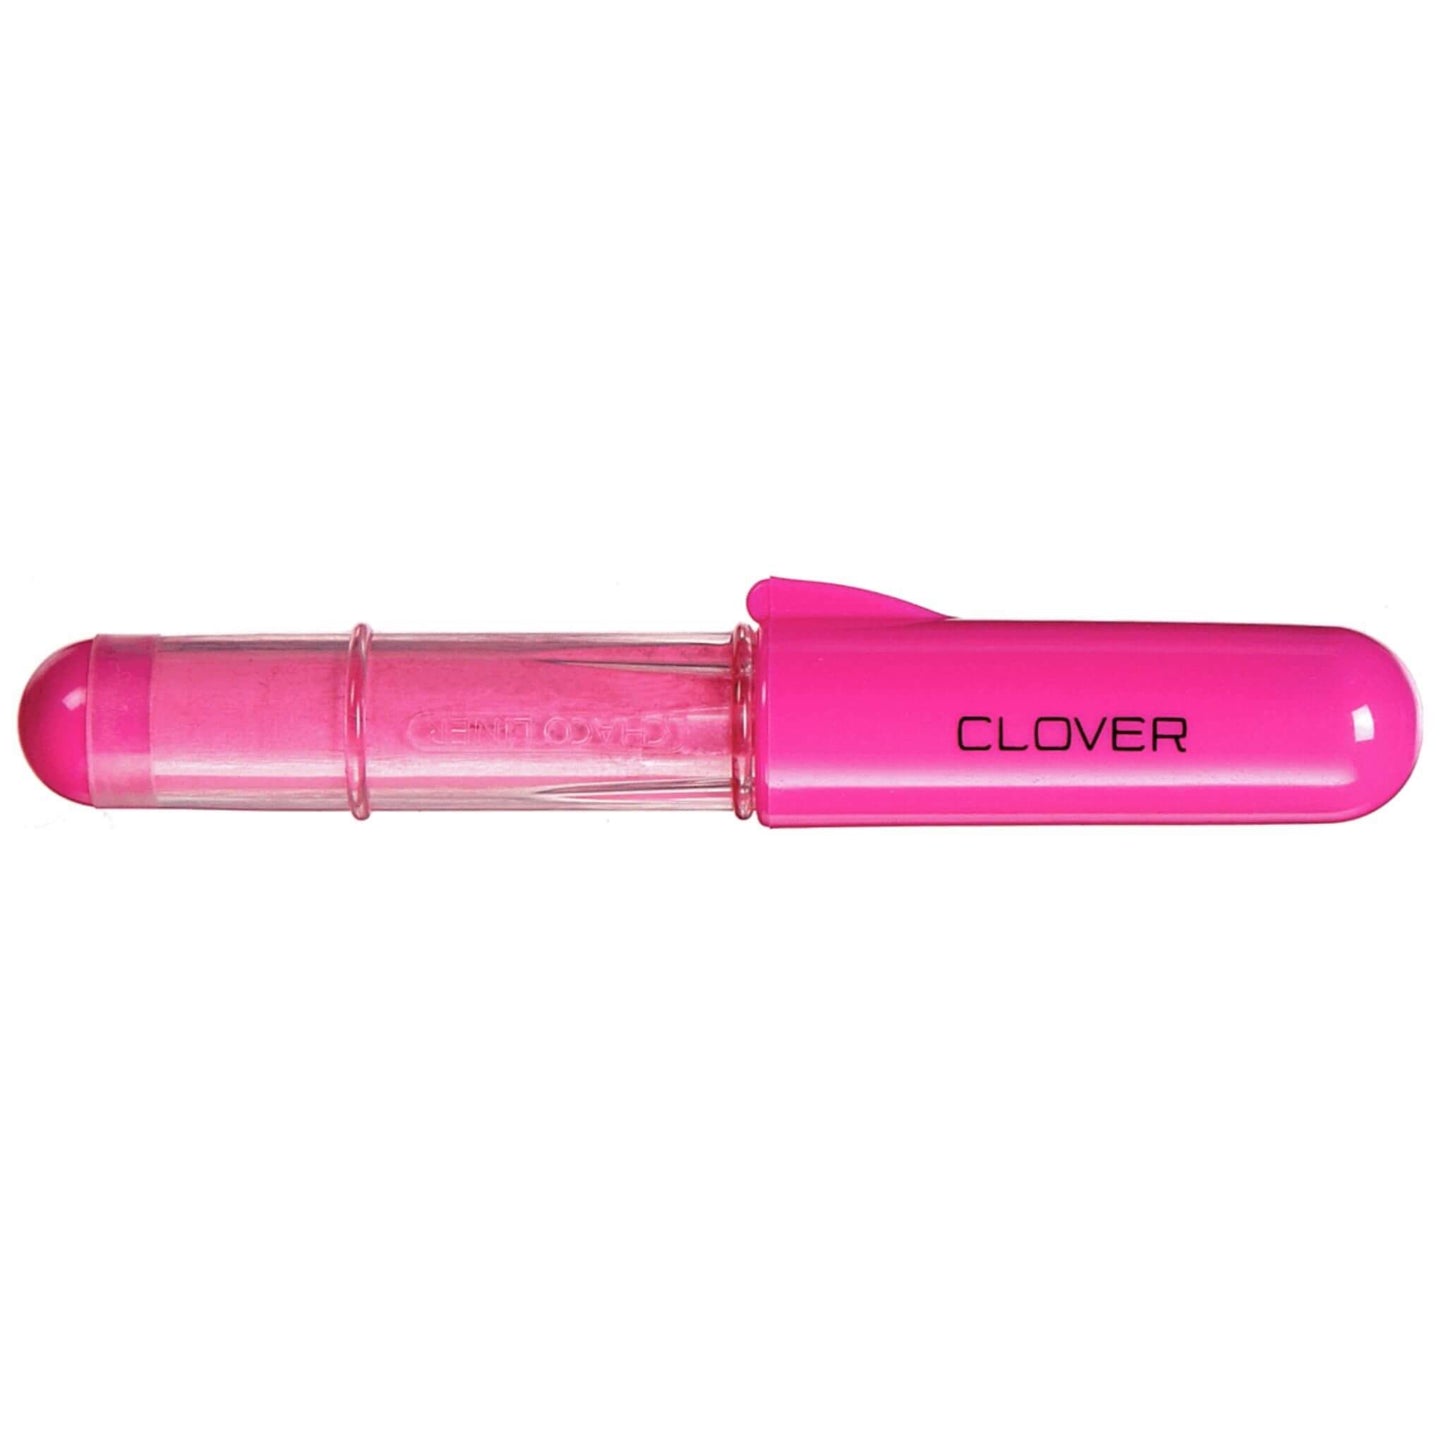 Chaco Liner Style Pen - Clover - Pink